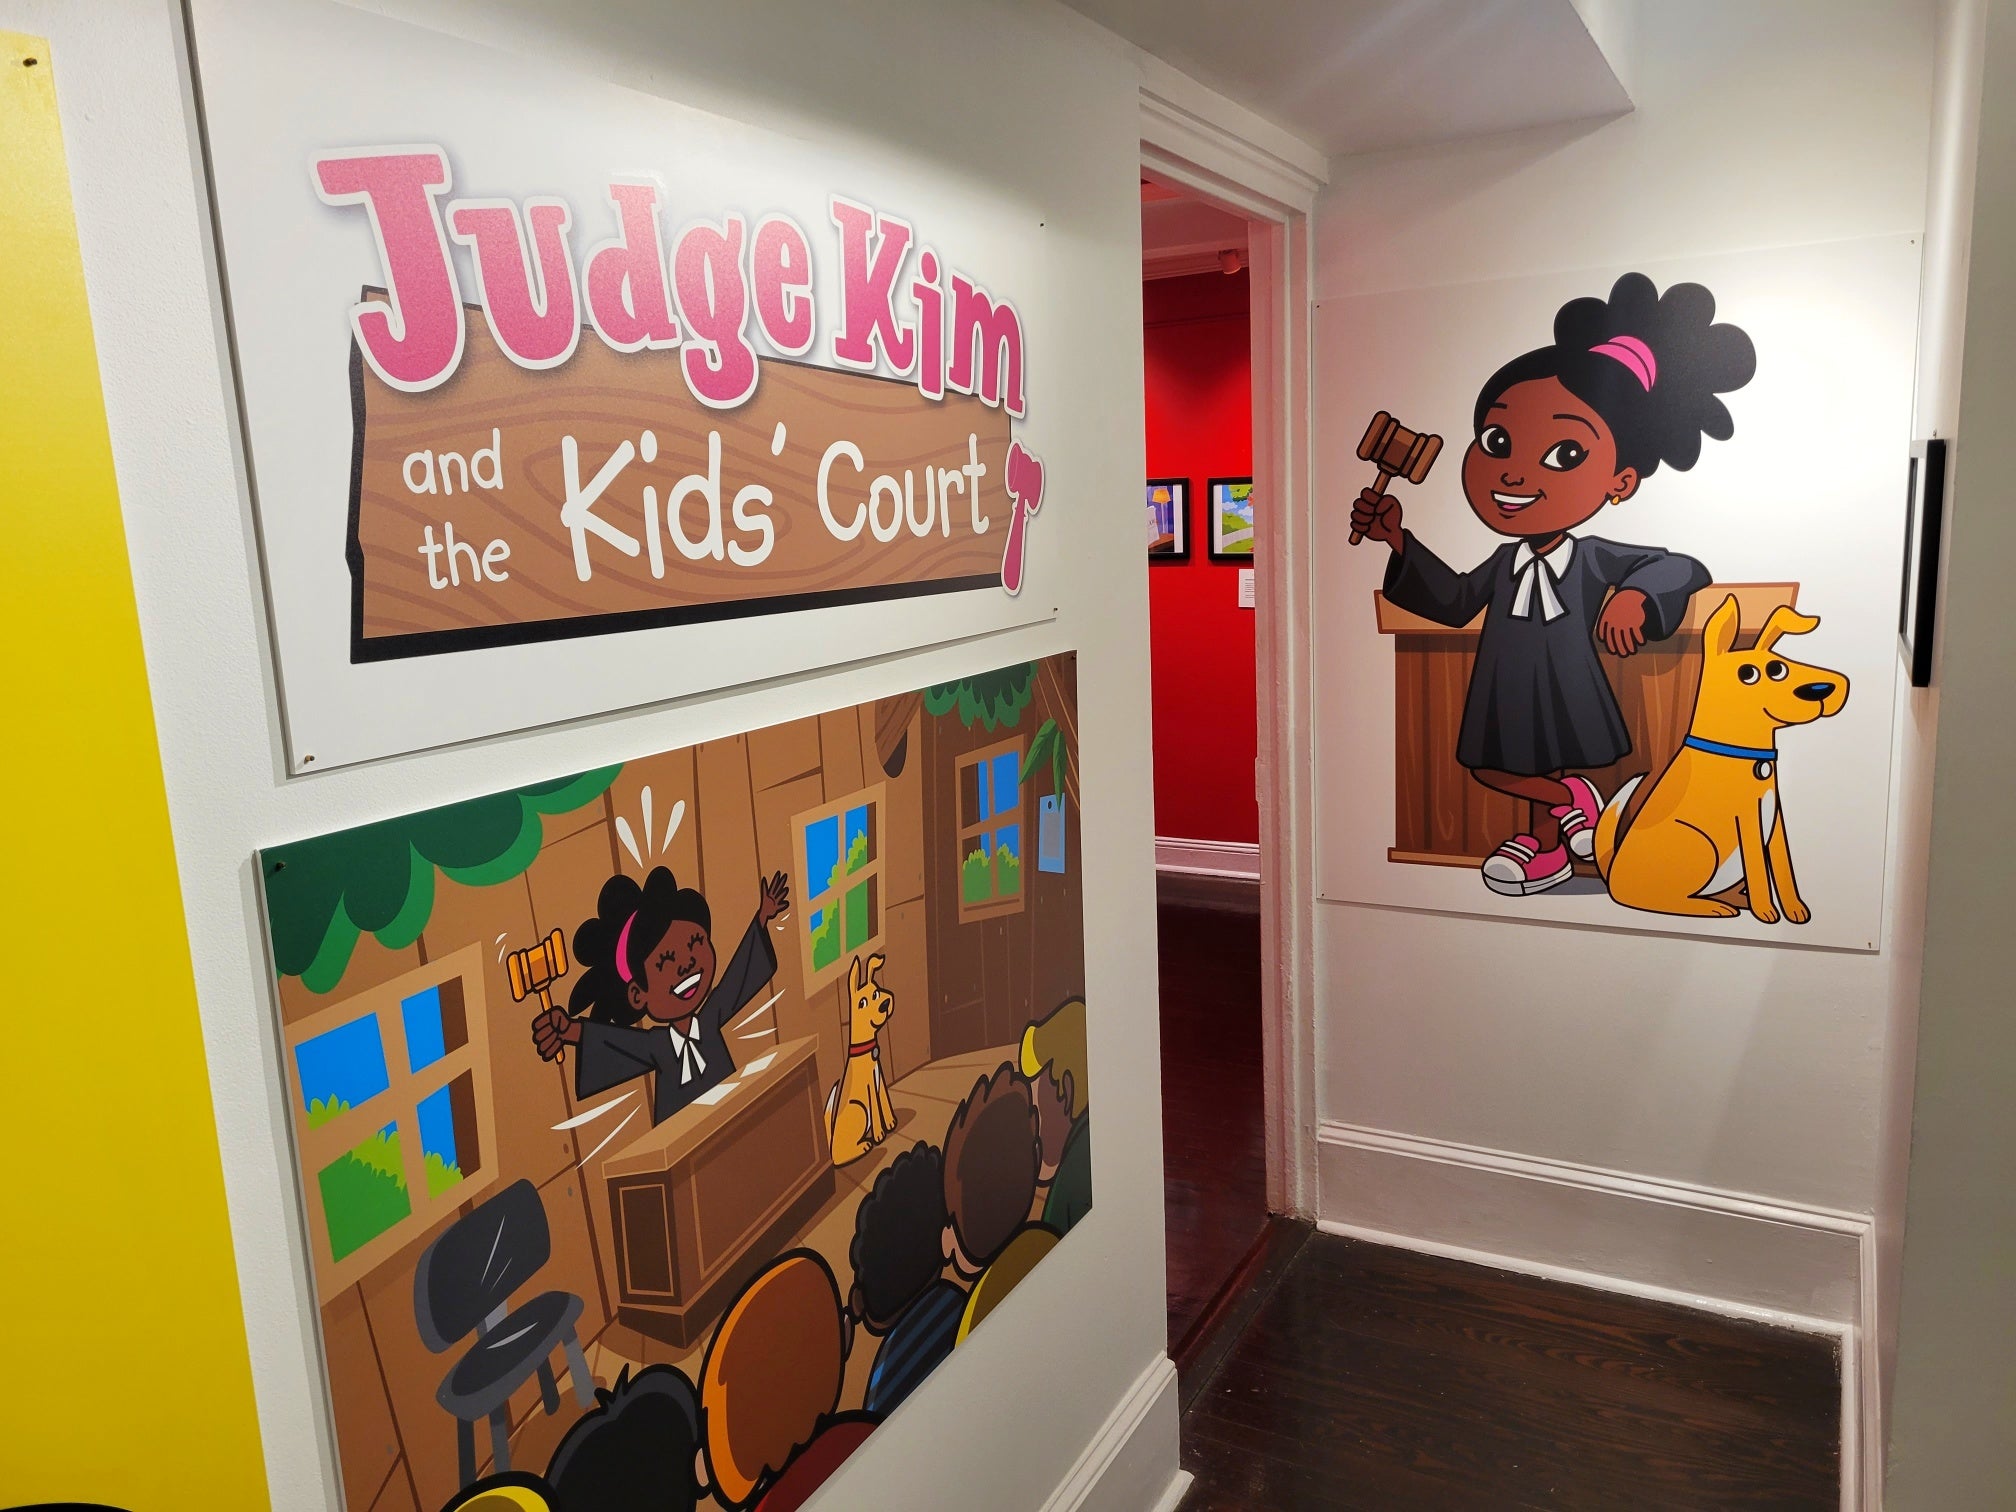 Photograph of Society of Illustrators gallery featuring Judge Kim